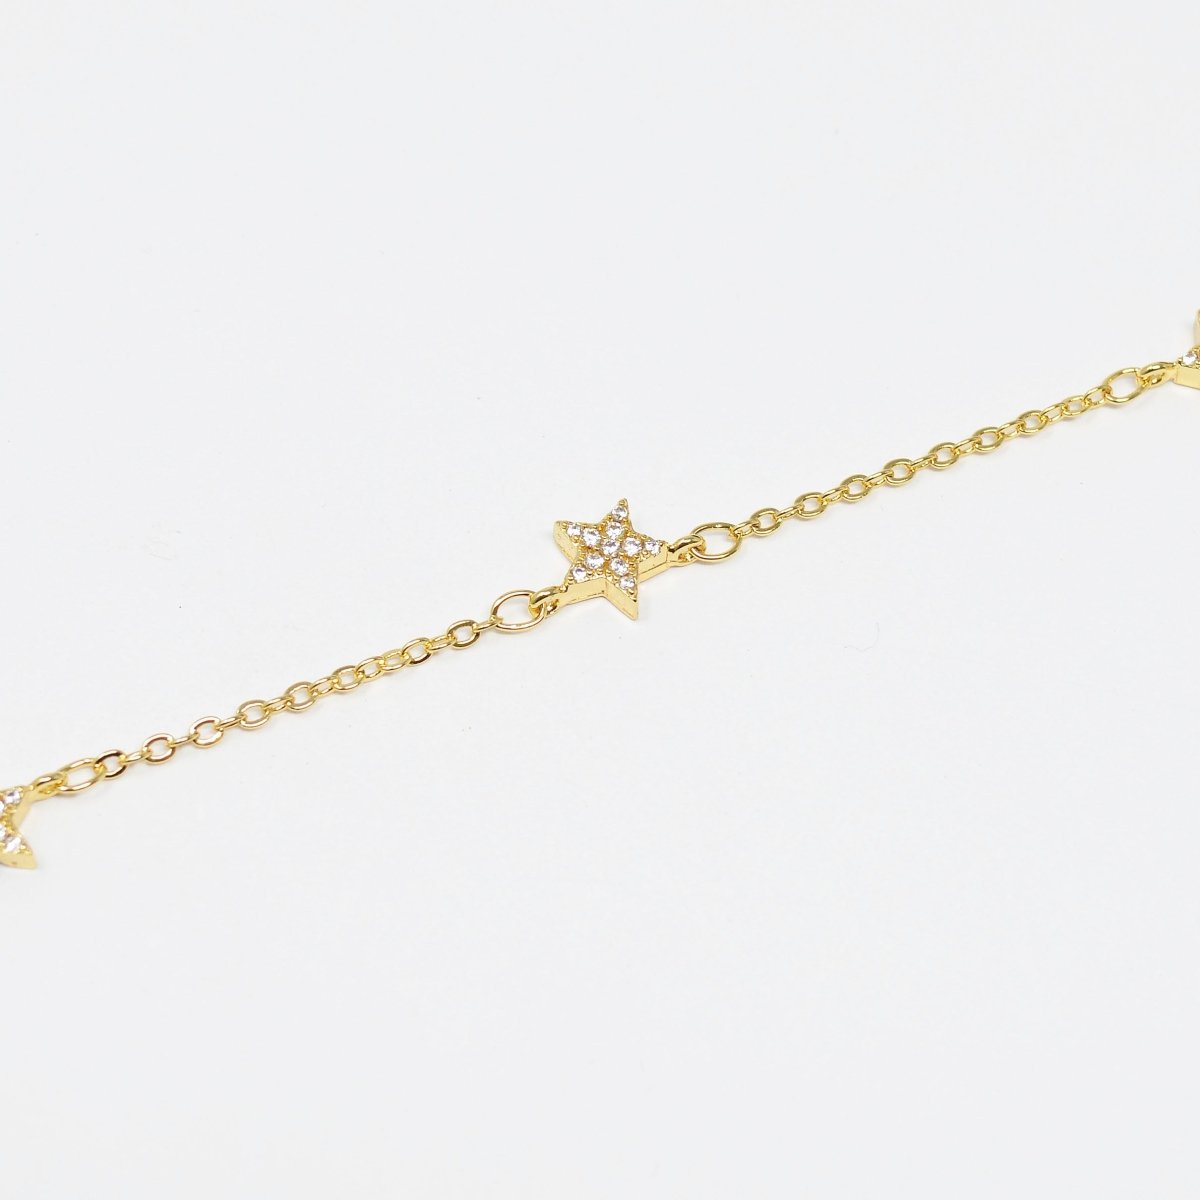 24K Gold Filled Cubic Star Chain by Yard, Polaris CZ Charm Specialty Link Chain by Foot, North Star 6.8mm x6.8mm Chain 0.7mm Thick | ROLL-415 Clearance Pricing - DLUXCA